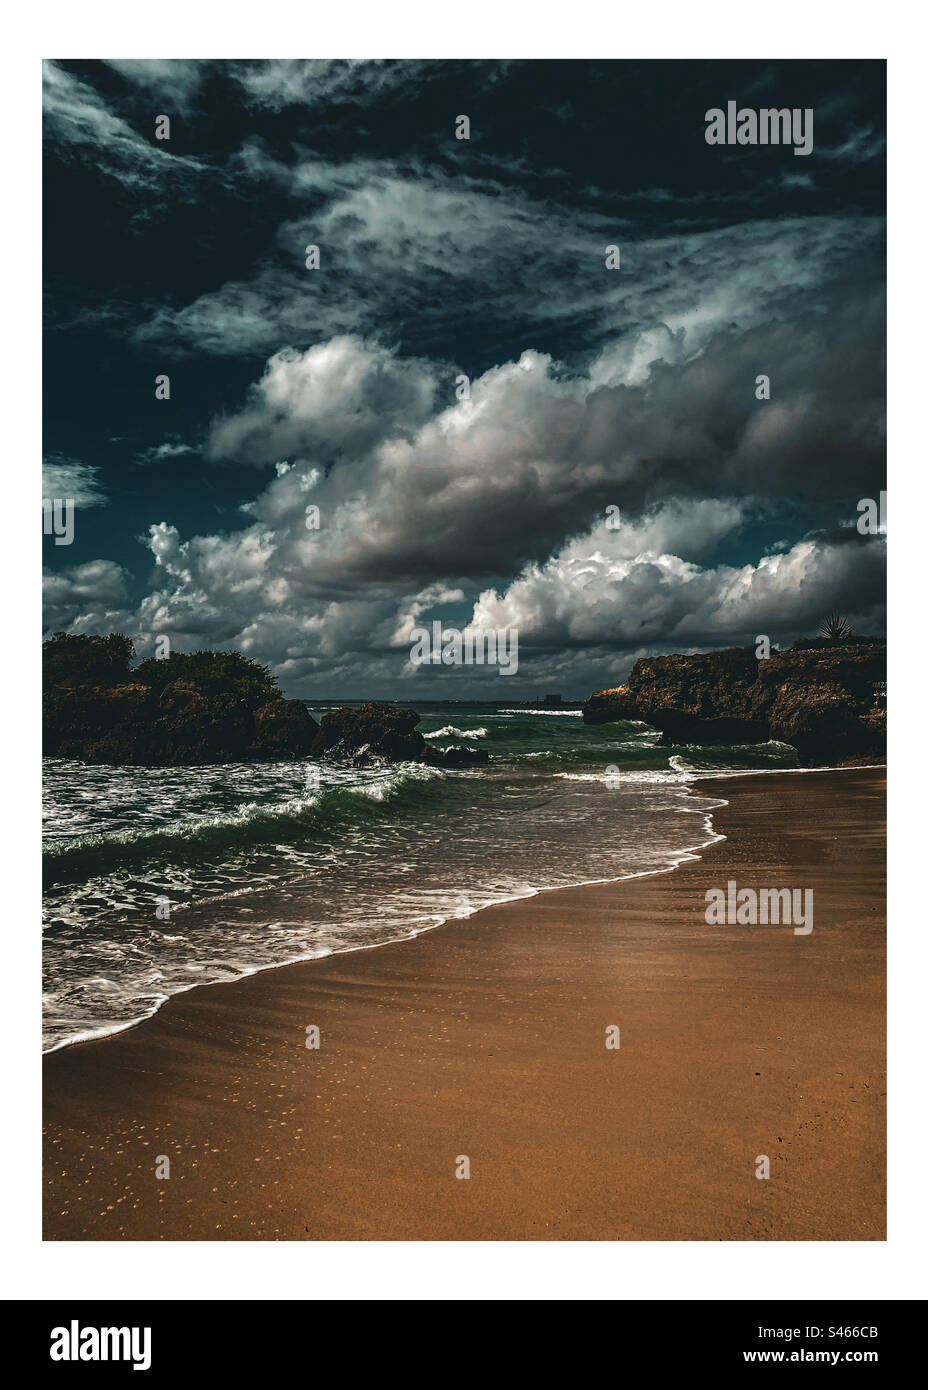 A dramatic night beach scene with waves and clouds. Dark sandy beach at night with waves and heavy dramatic cloudy skies, Stock Photo